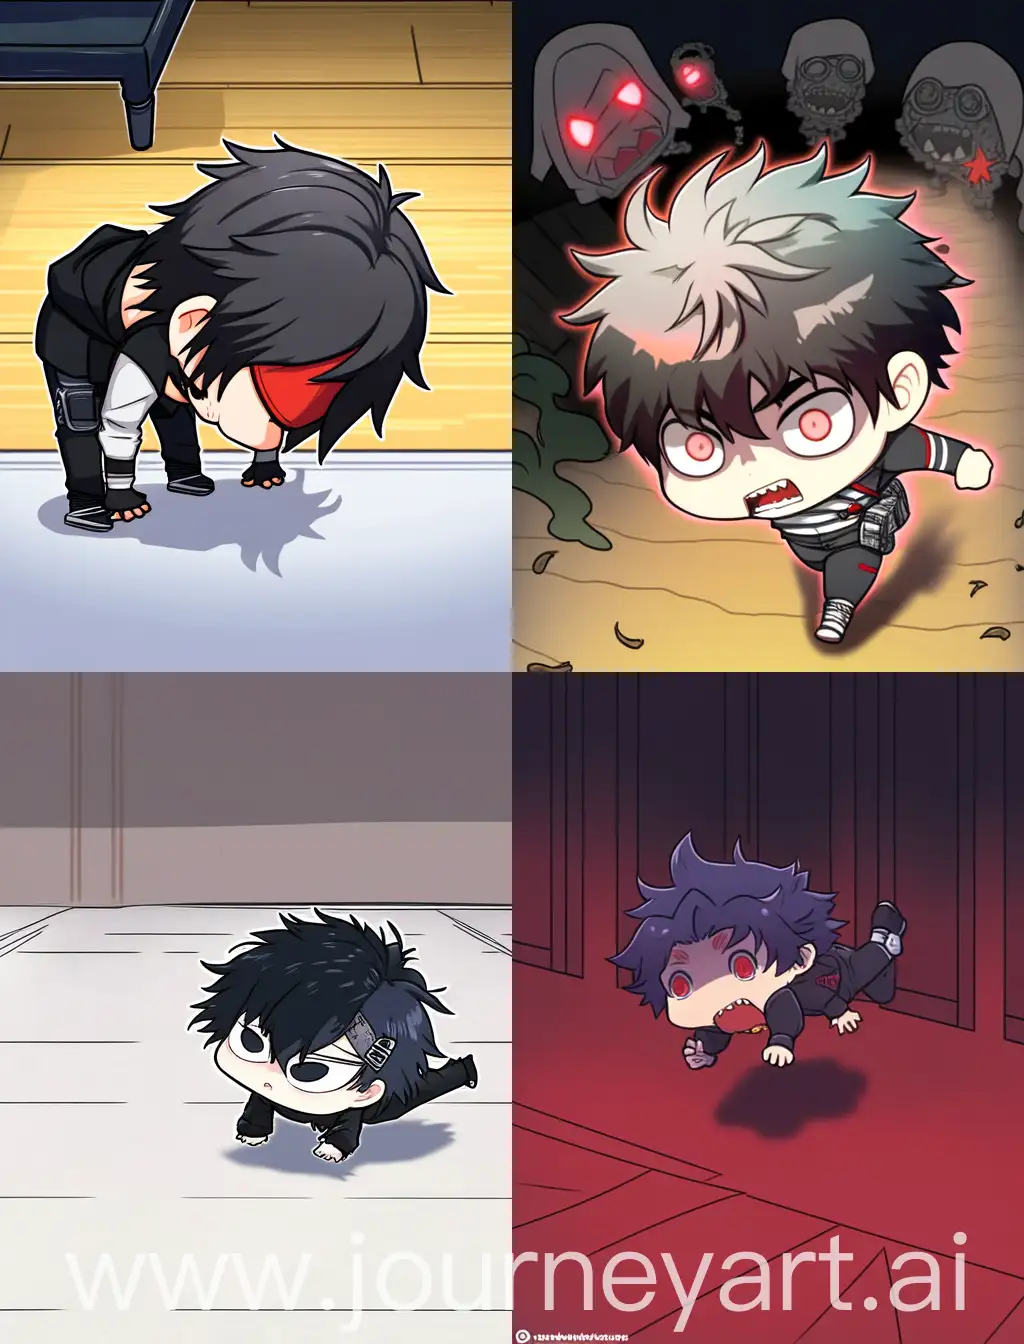 Chibi-Anime-Emo-Guy-Doing-PushUps-in-Spooky-Atmosphere